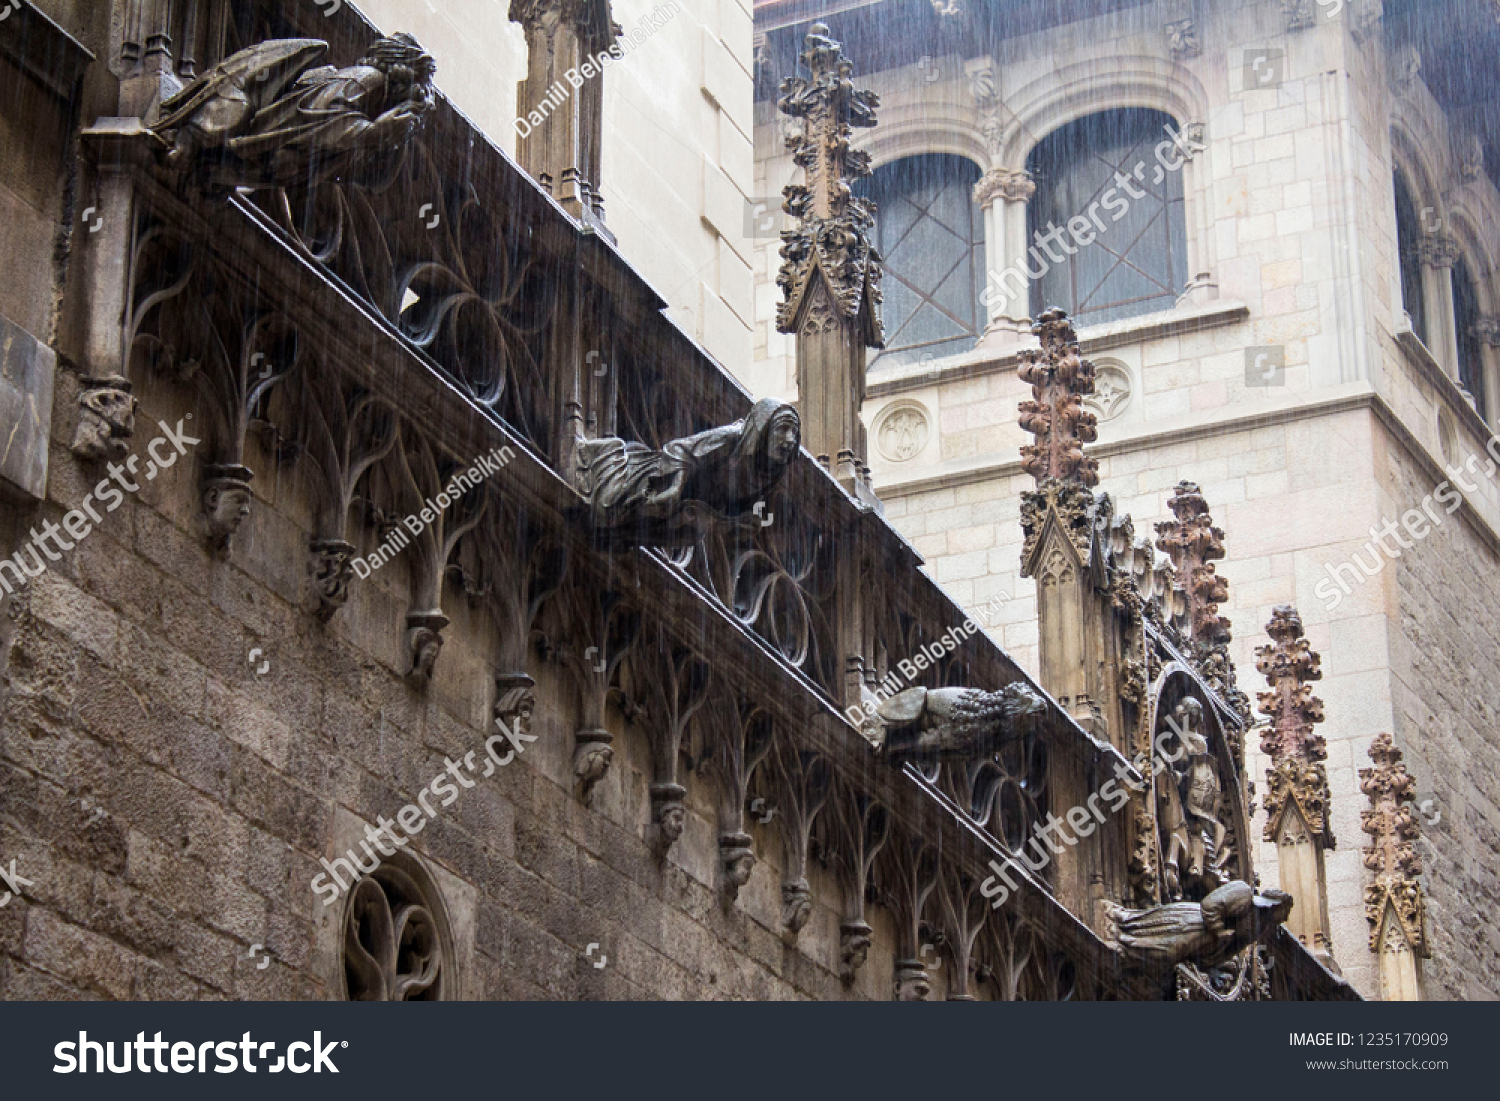 Cathedral various ancient gargoyles on the facade of old spanish gothic catholic cathedral under heavy rain in Barcelona, Spain. #1235170909